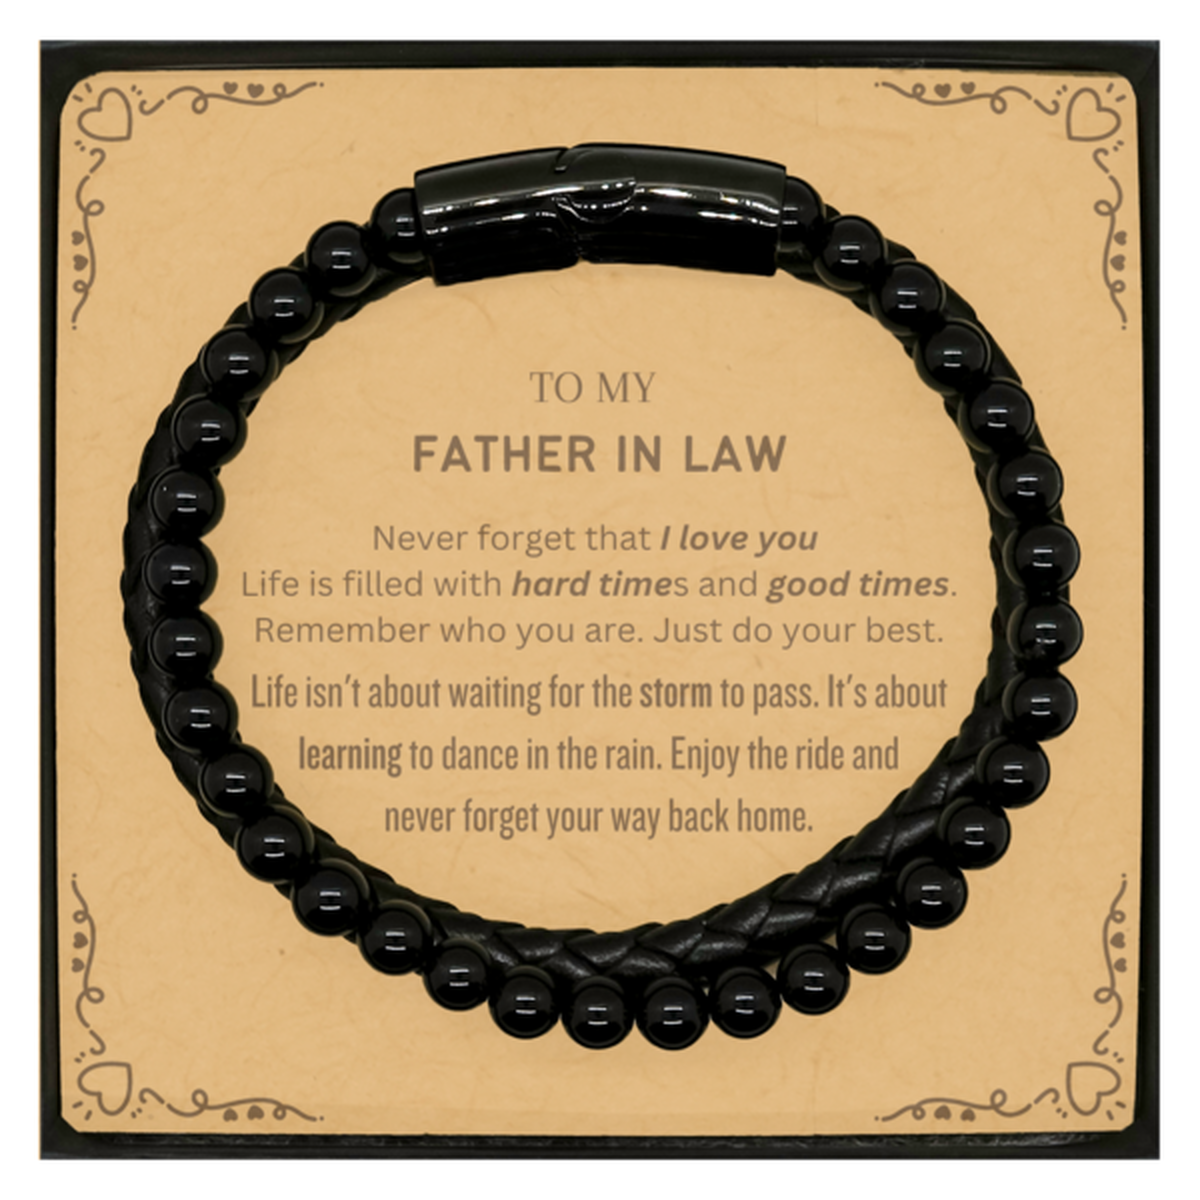 Christmas Father In Law Stone Leather Bracelets Gifts, To My Father In Law Birthday Thank You Gifts For Father In Law, Graduation Unique Gifts For Father In Law To My Father In Law Never forget that I love you life is filled with hard times and good times